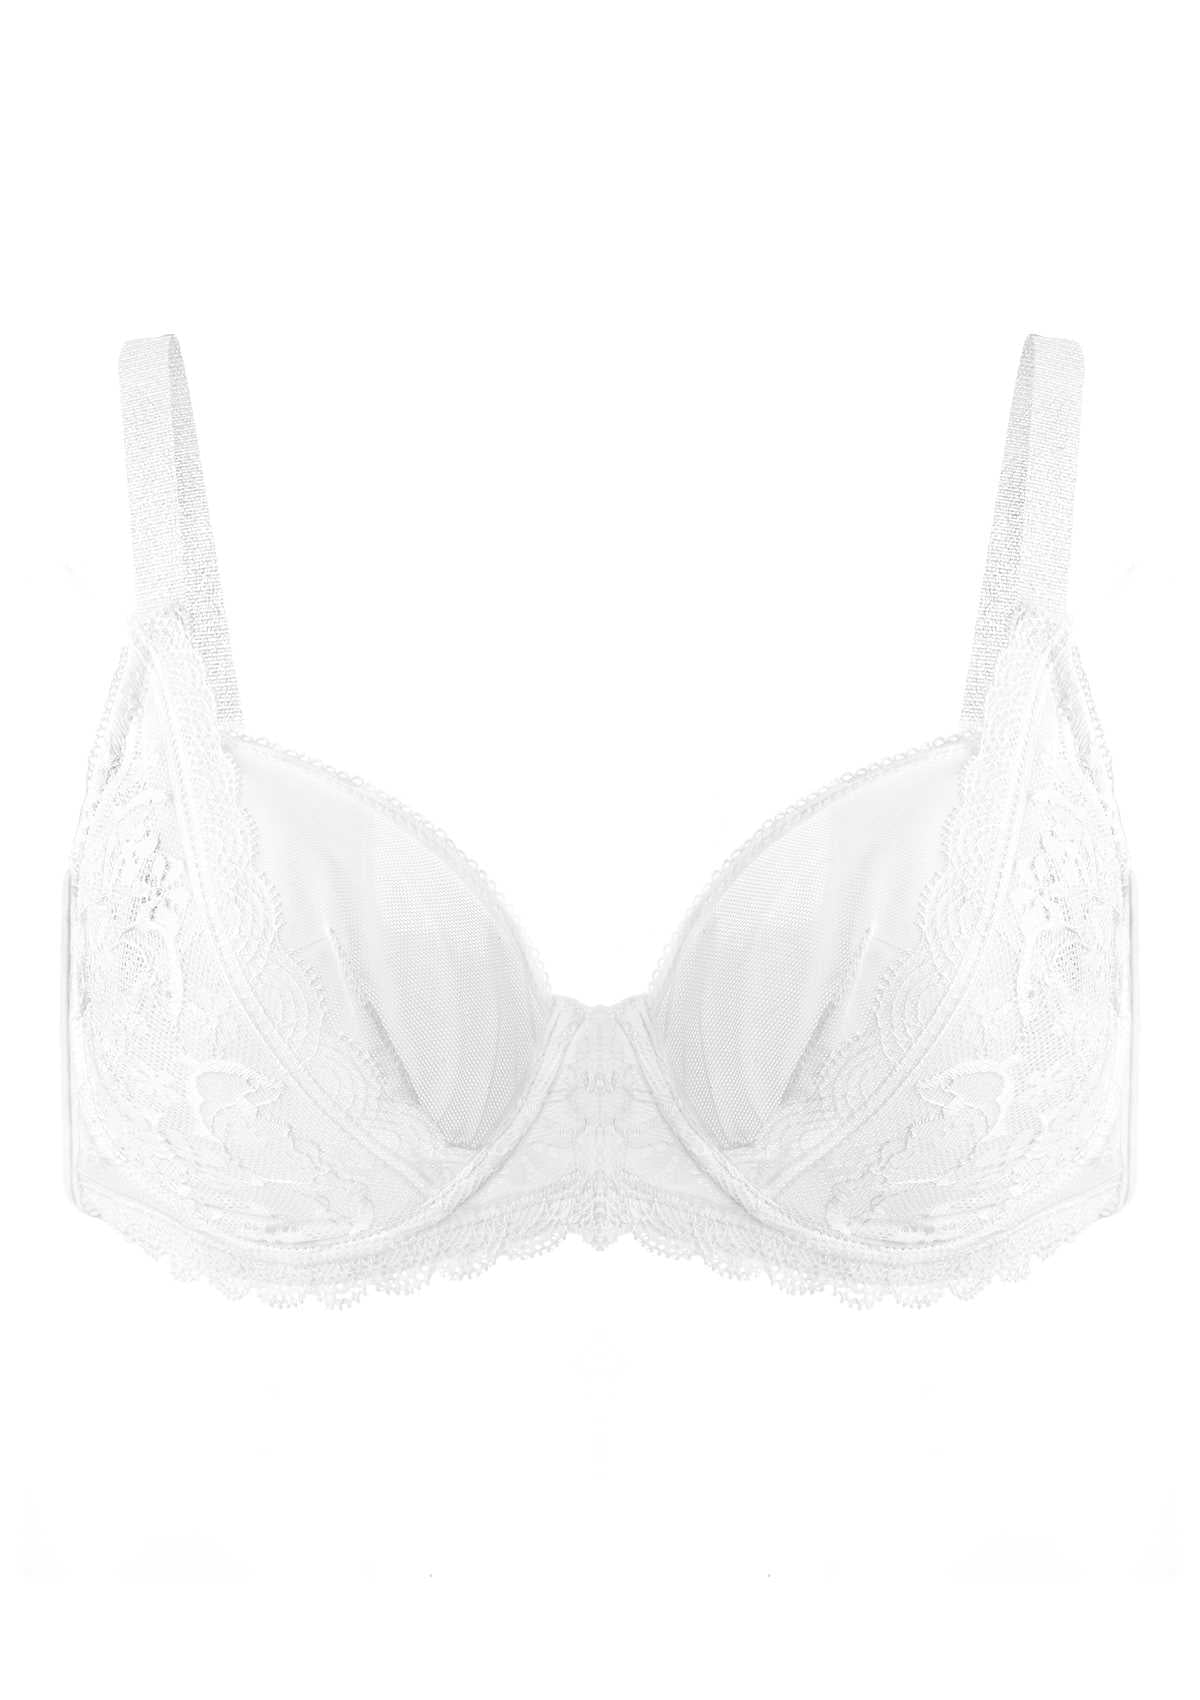 HSIA Anemone Big Bra: Best Bra For Lift And Support, Floral Bra - Light Blue / 40 / D